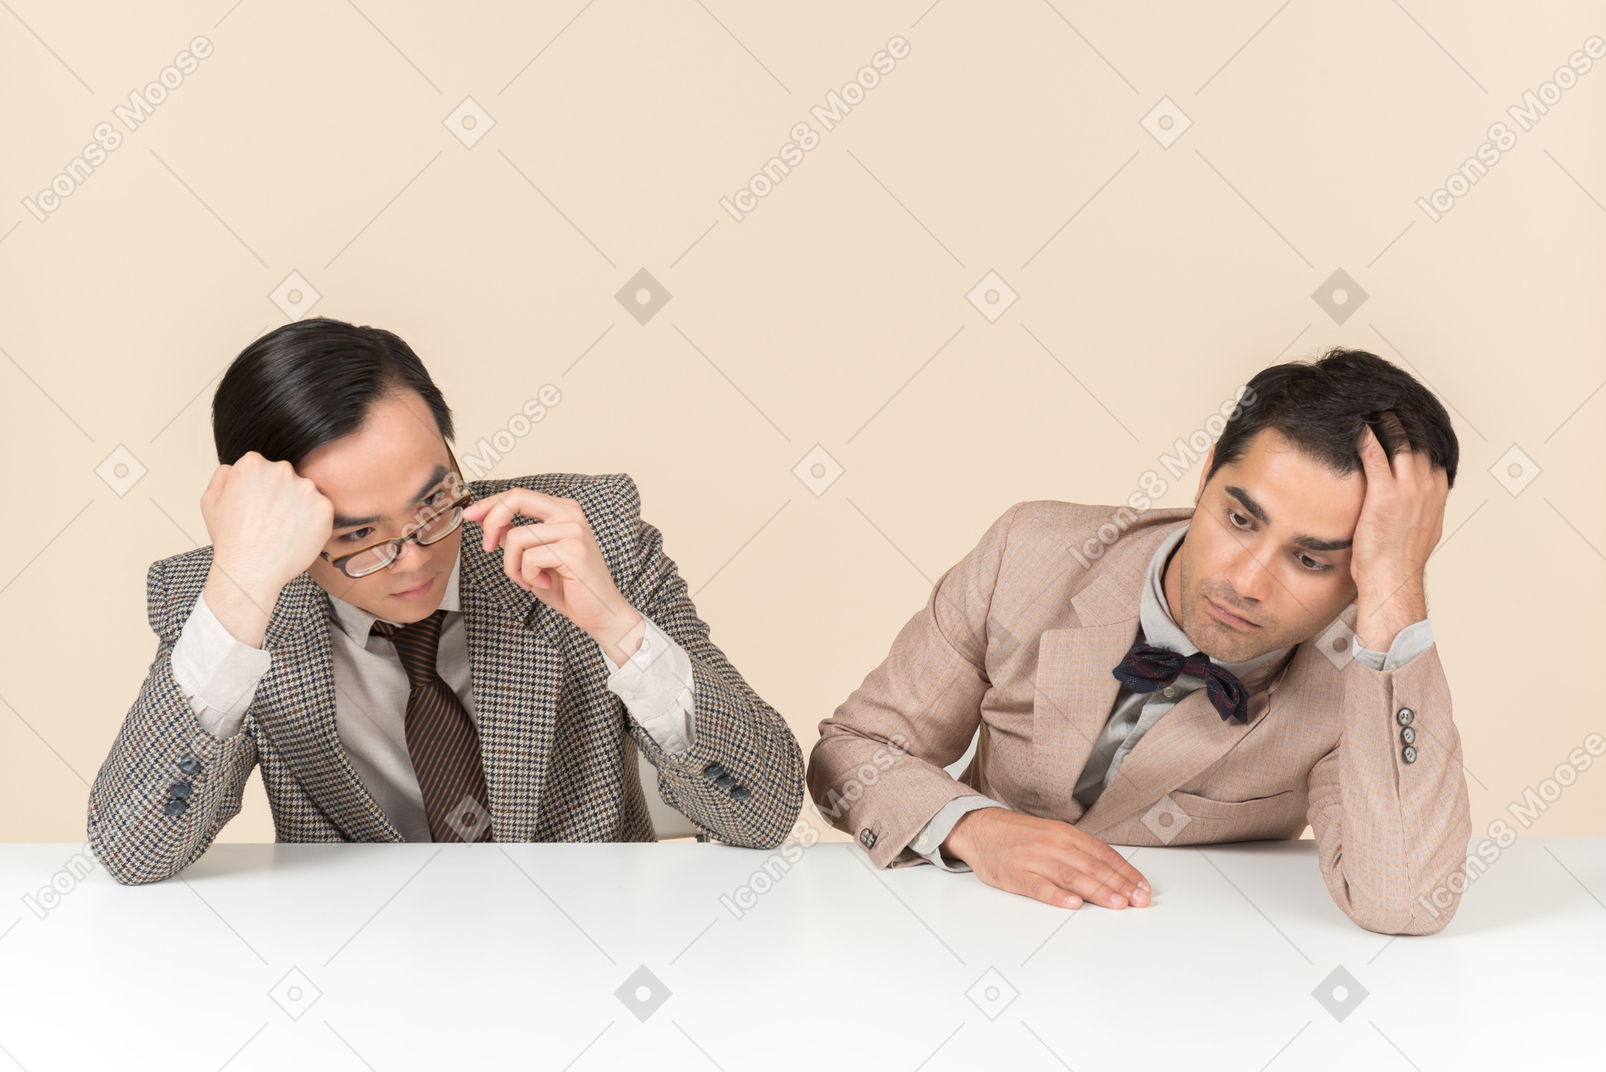 Two young nerds sitting at the table